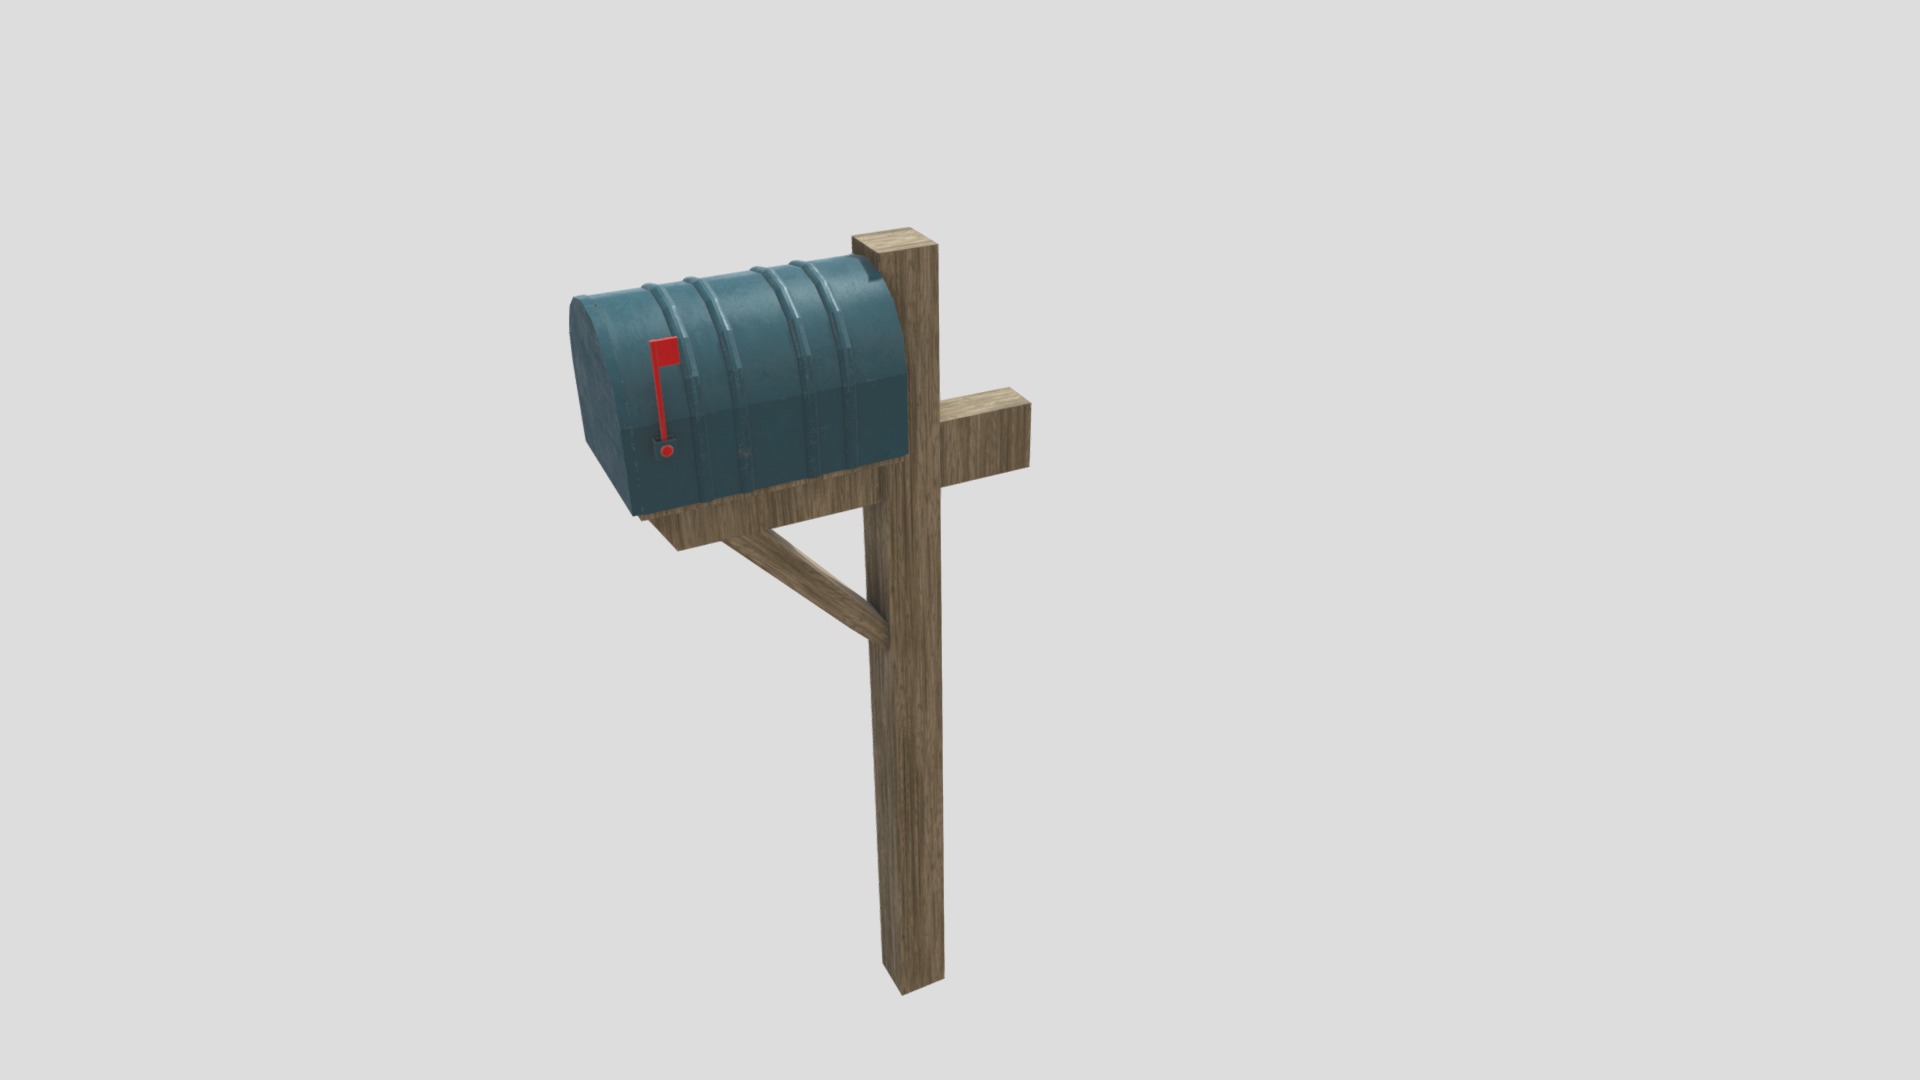 3D model Classic Post Box - This is a 3D model of the Classic Post Box. The 3D model is about a blue and black box on a wooden post.